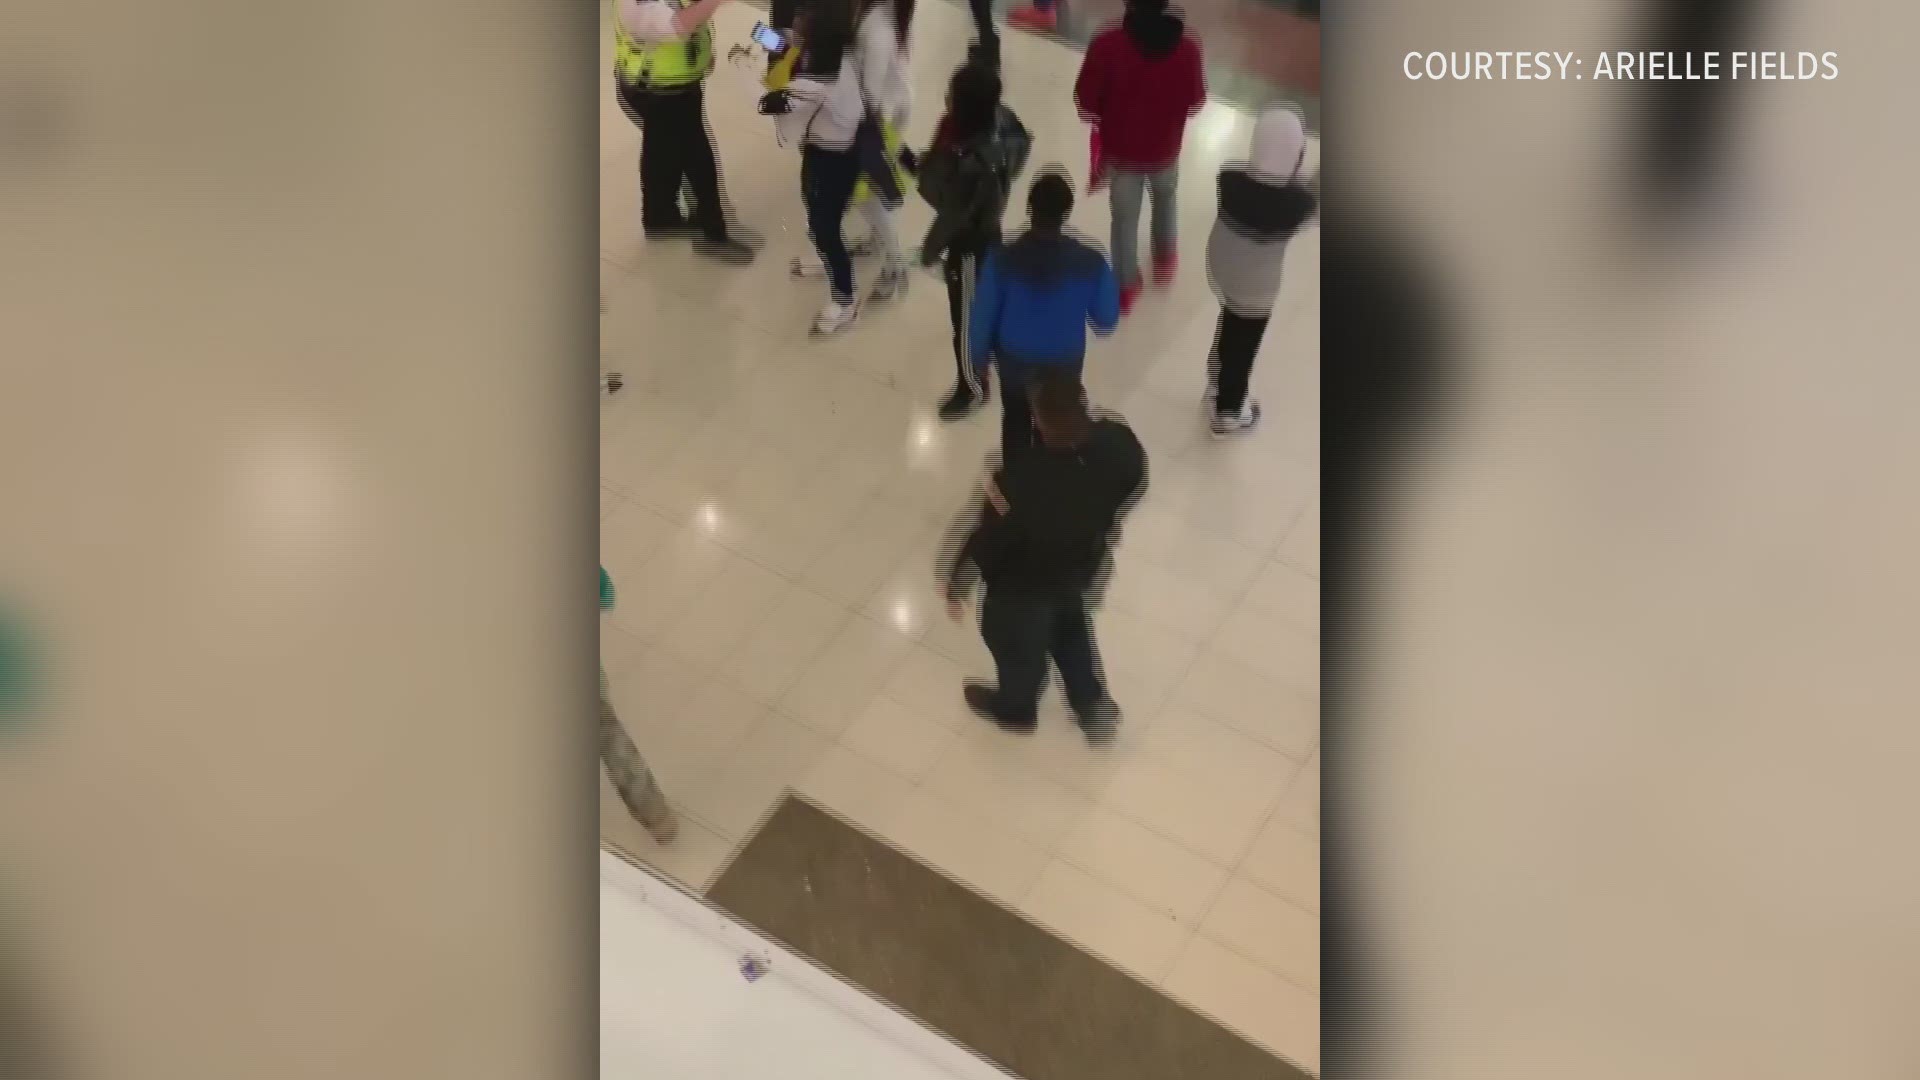 Arielle Fields shared this video she took inside the Walden Galleria of large fights that broke out. Cheektowaga Police say they dealt with at least 3 large fights. The situation is under control, according to CPD, and reports that shots were fired were FALSE.